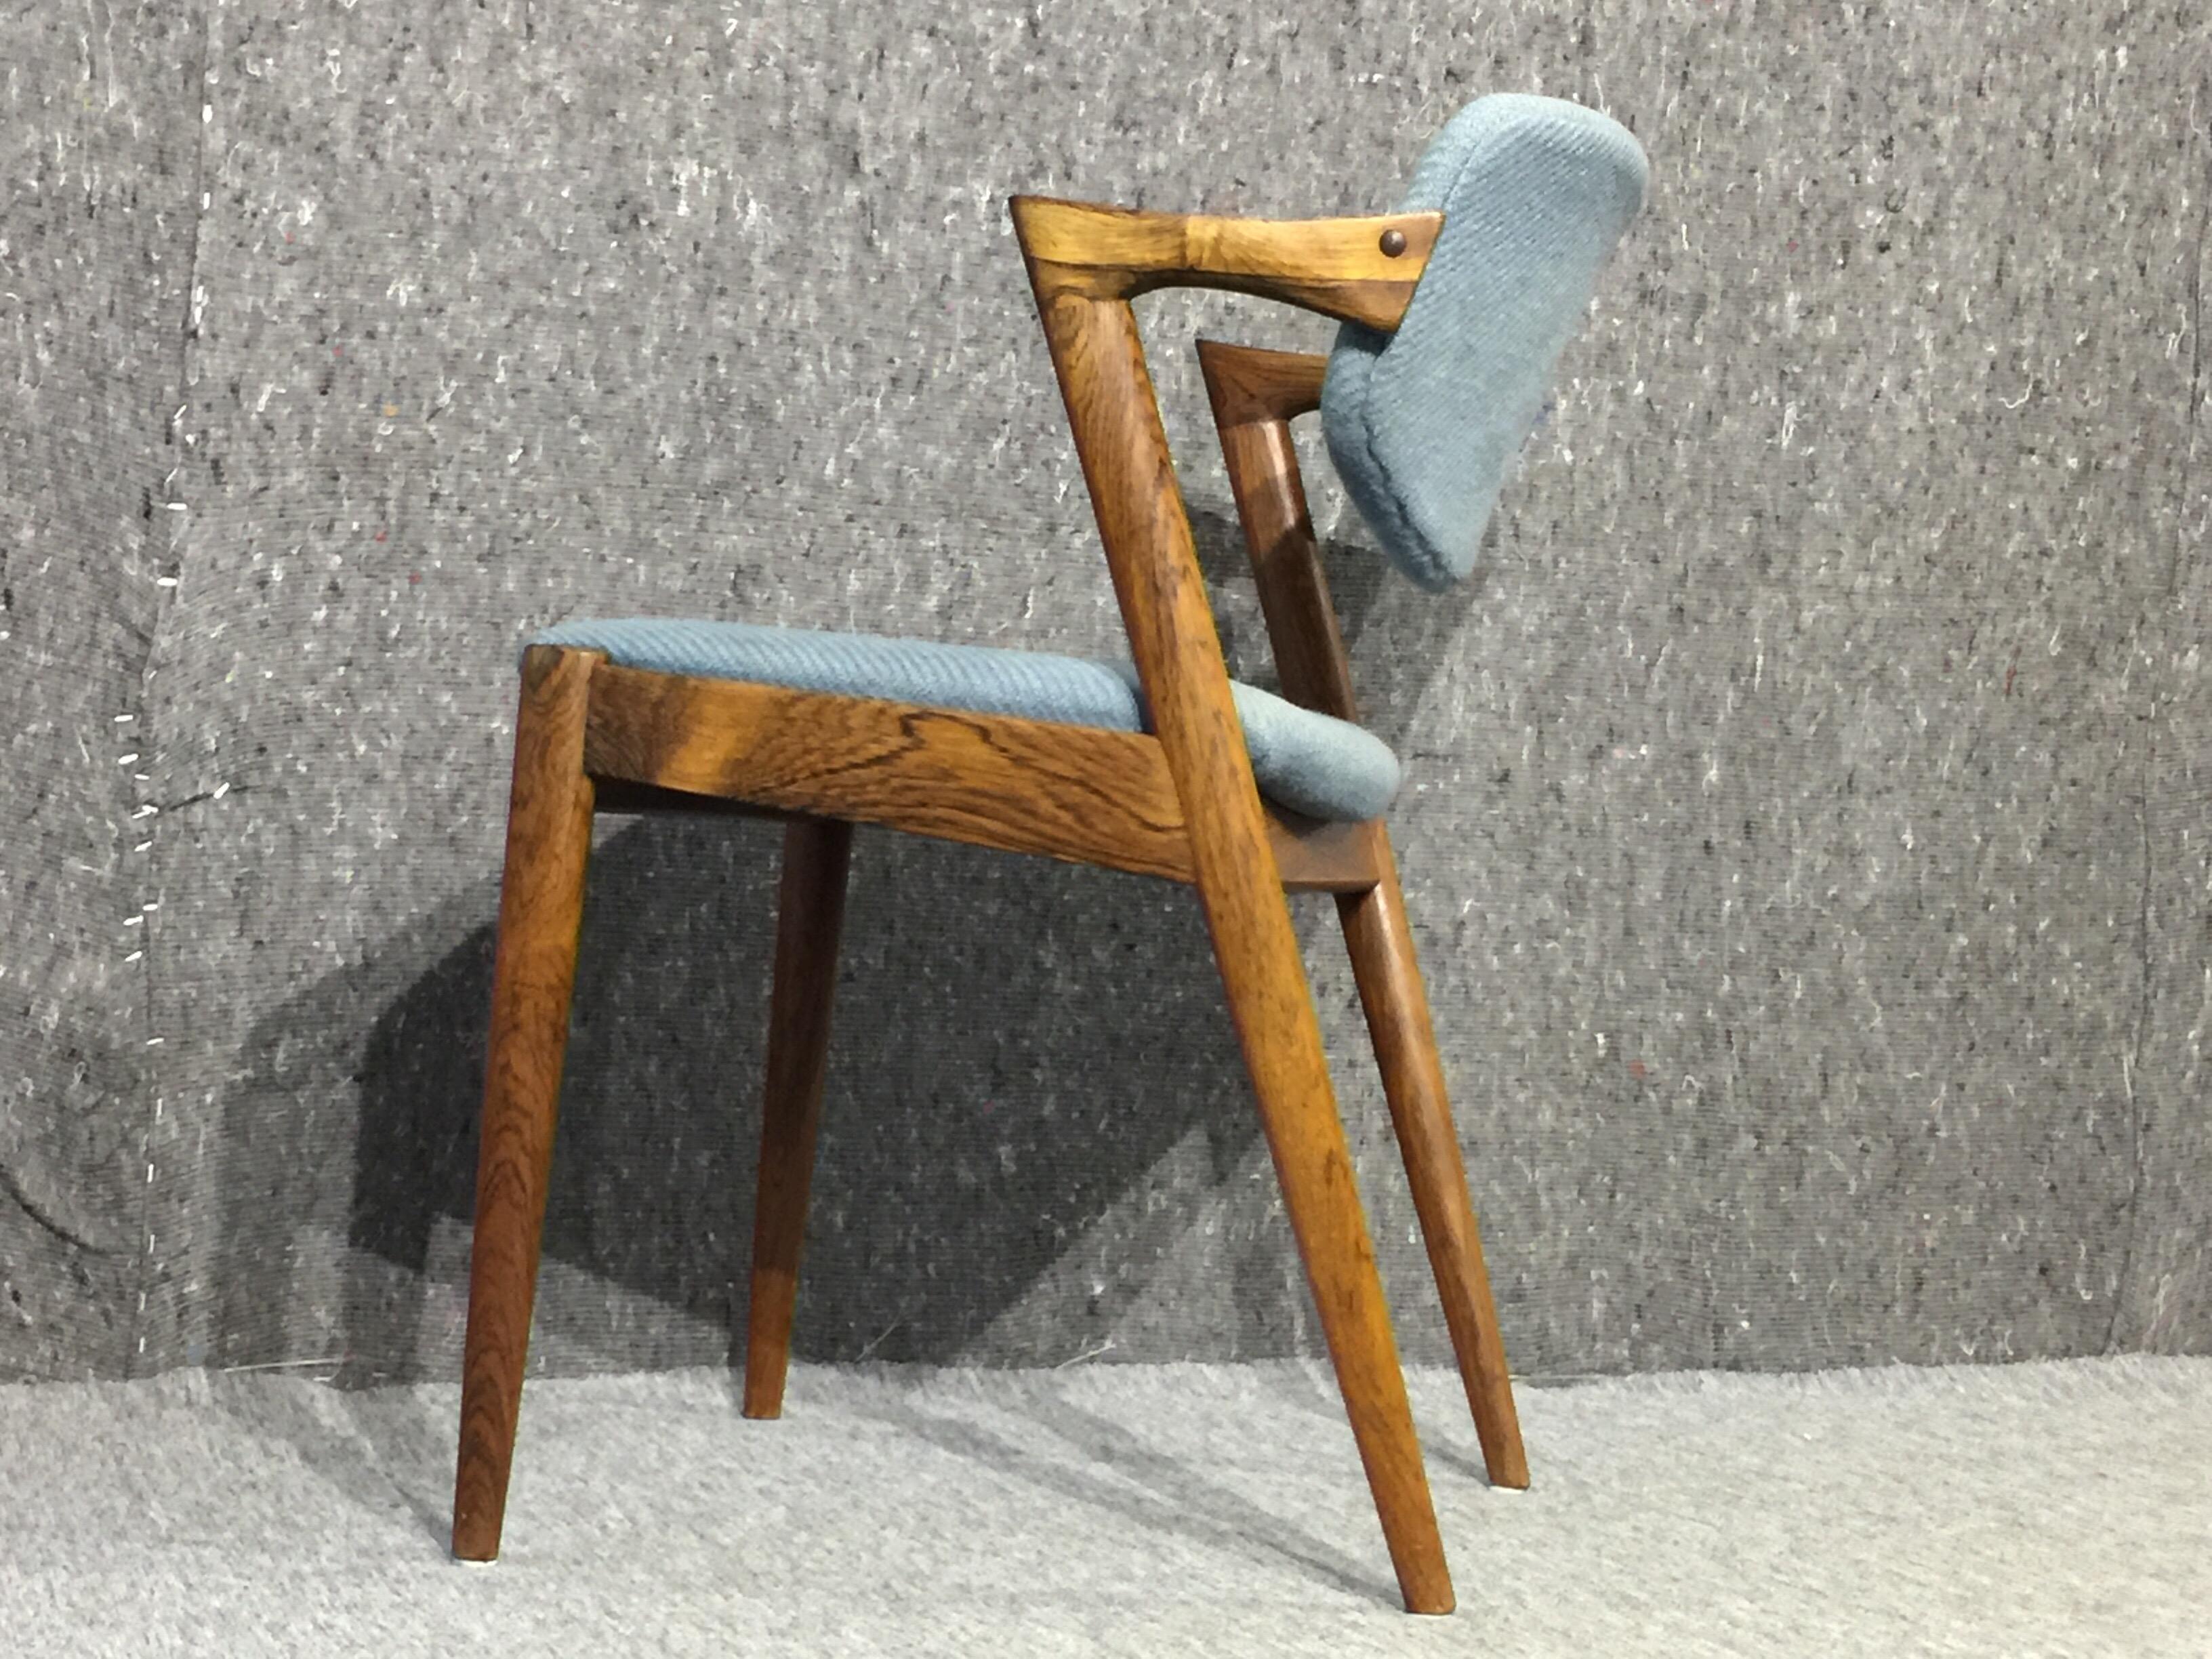 Set of four rosewood dining chairs, model 42, designed by Kai Kristiansen for Schou Andersen in the 1960s. They have a Z-shaped armrest and a suspended backrest. This model has become an icon for Kai Kristiansen's design. They will look amazing in